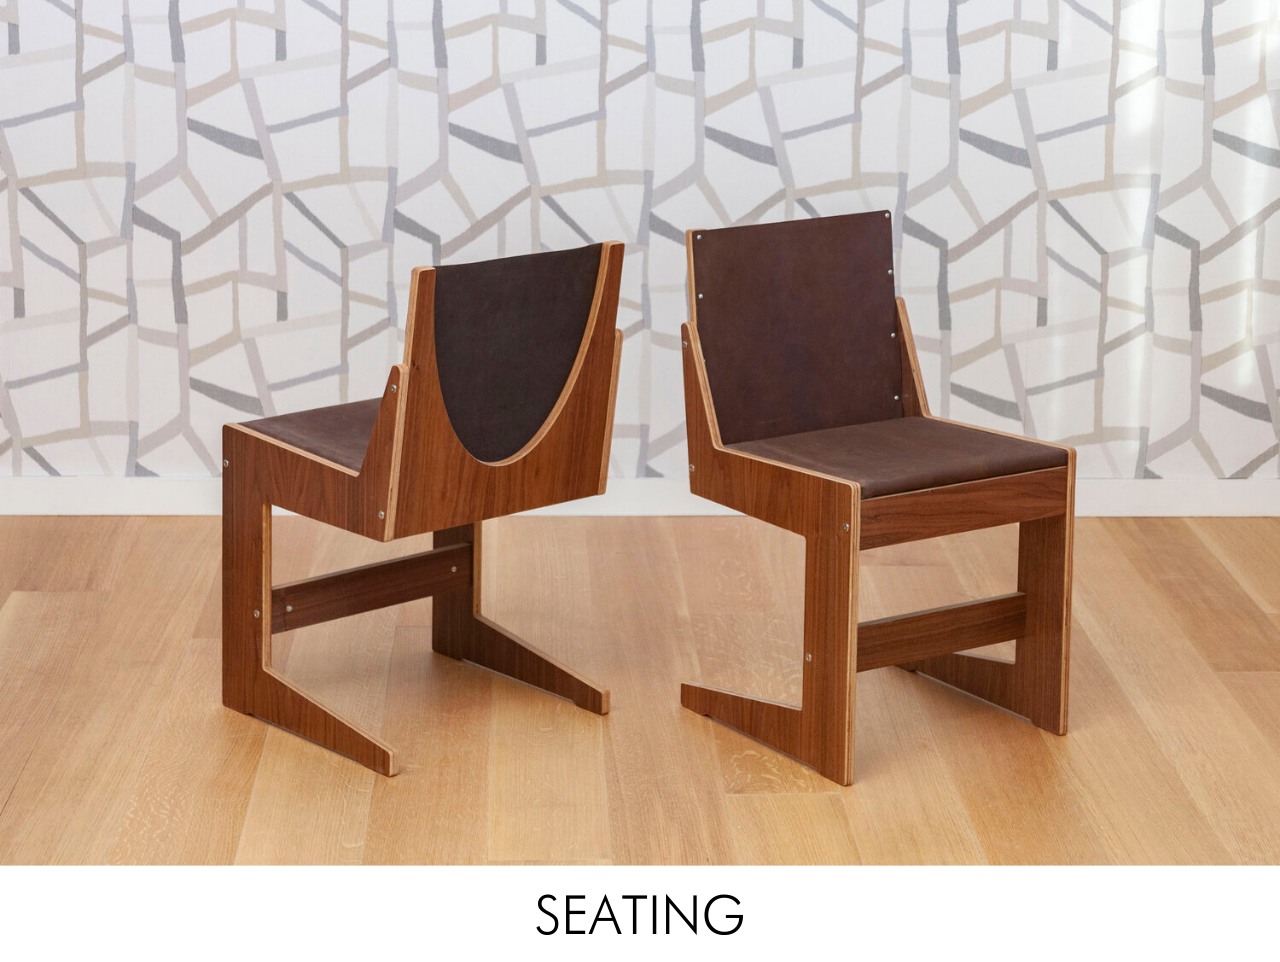 Two contemporary wooden chairs with leather backrests against a geometric patterned wallpaper.